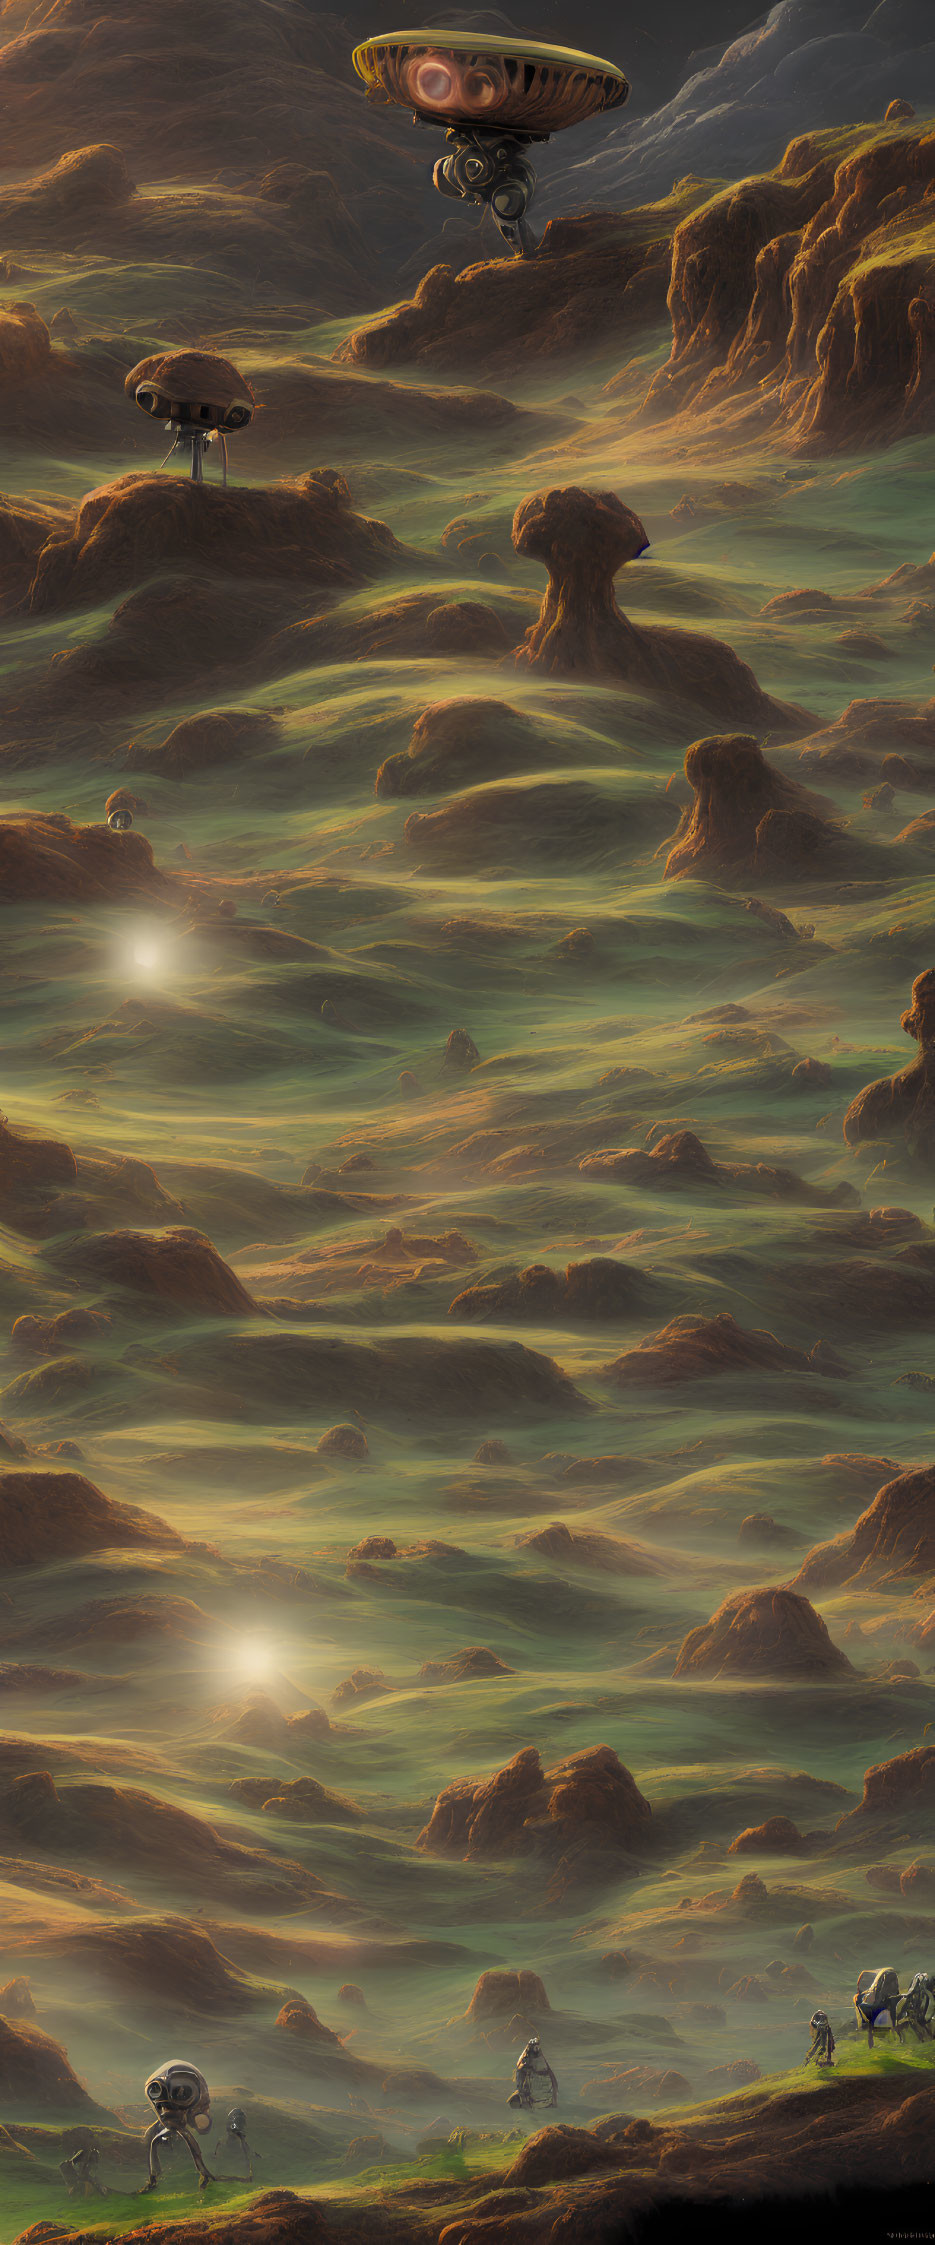 Alien landscape with rolling hills, river, and hovering spaceships.